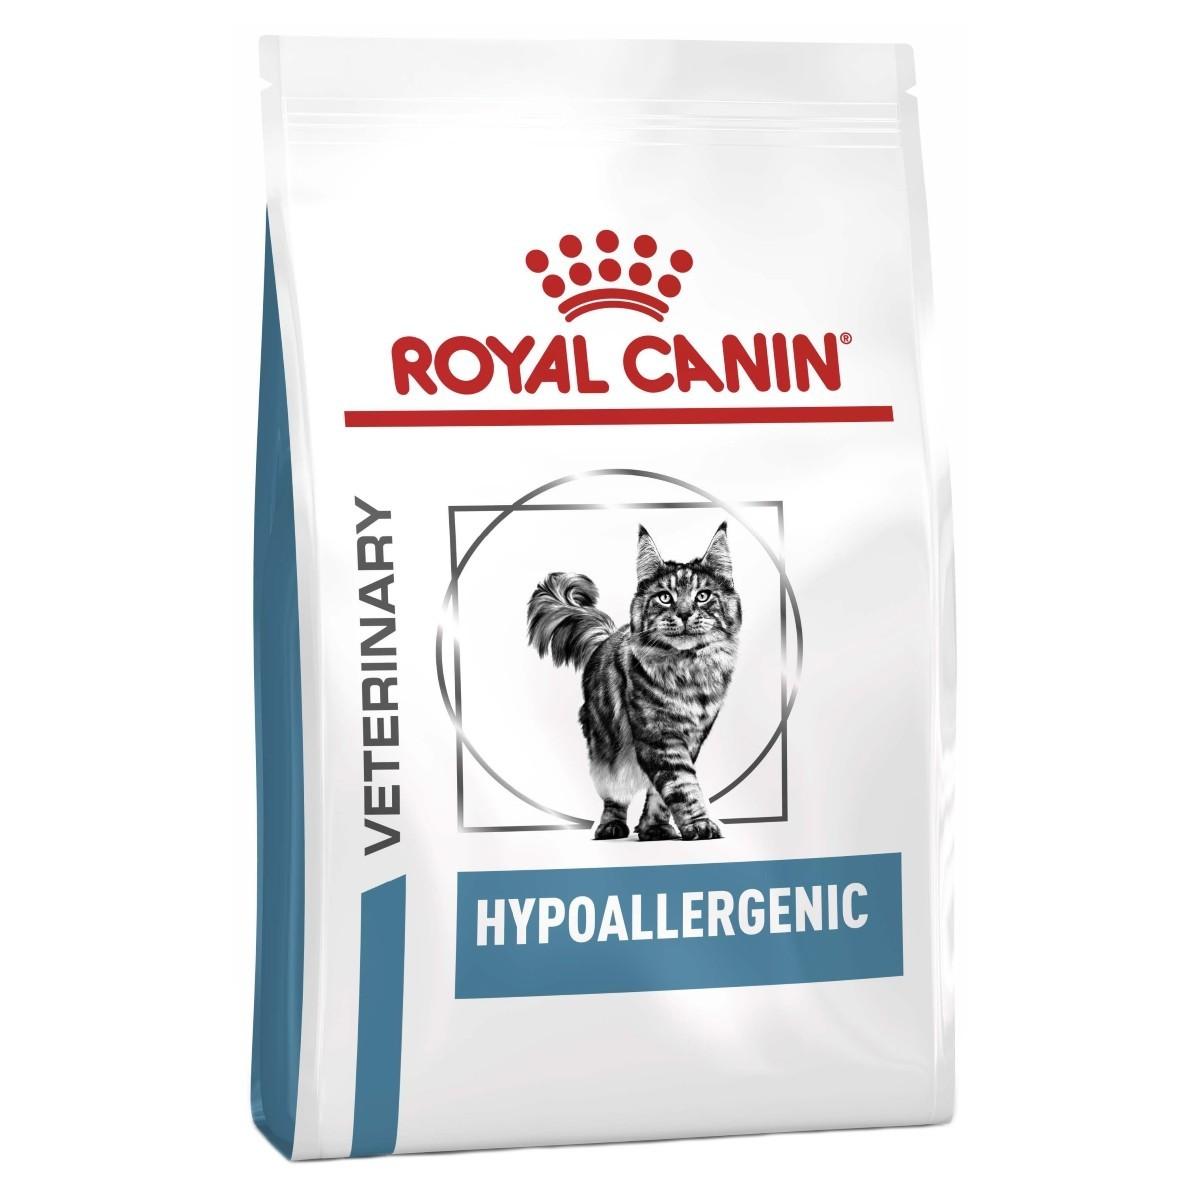 ROYAL CANIN Hypoallergenic cat